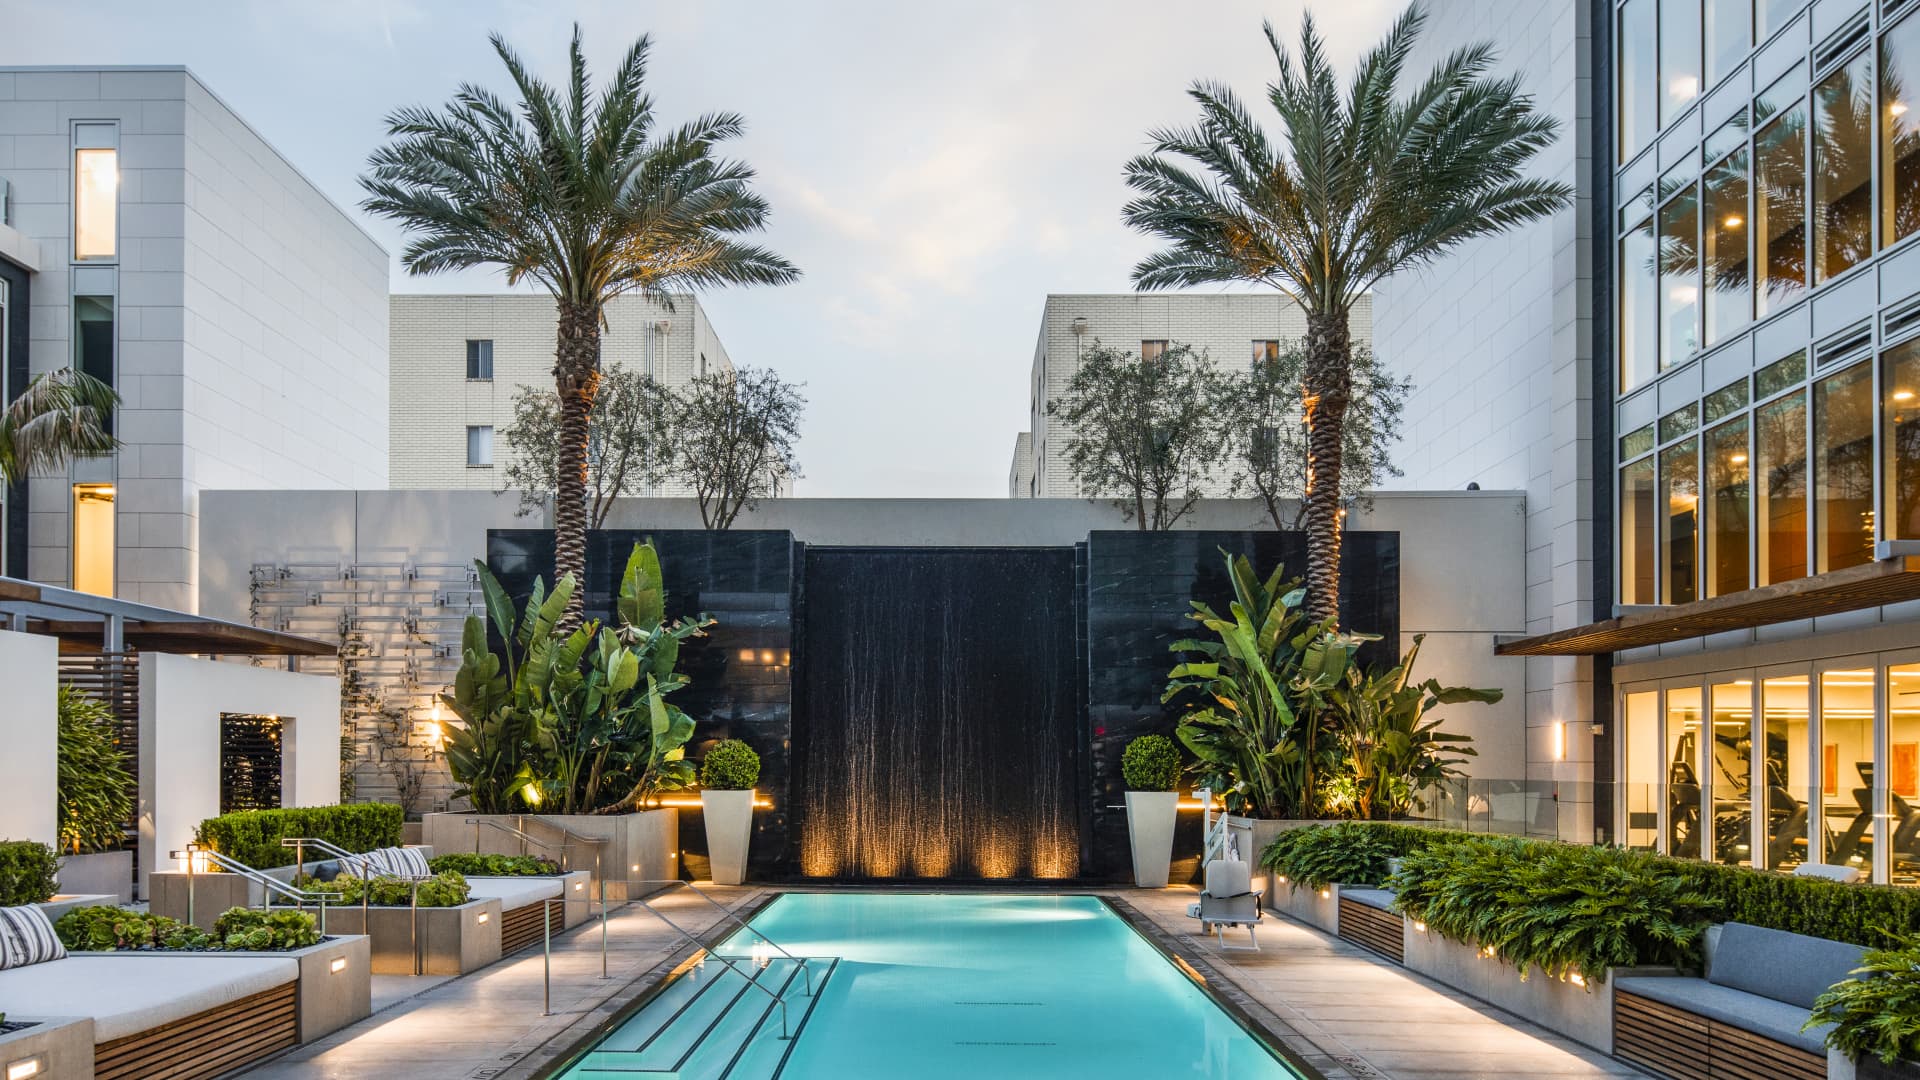 The full-service pool area at the Four Seasons Private Residences Los Angeles.